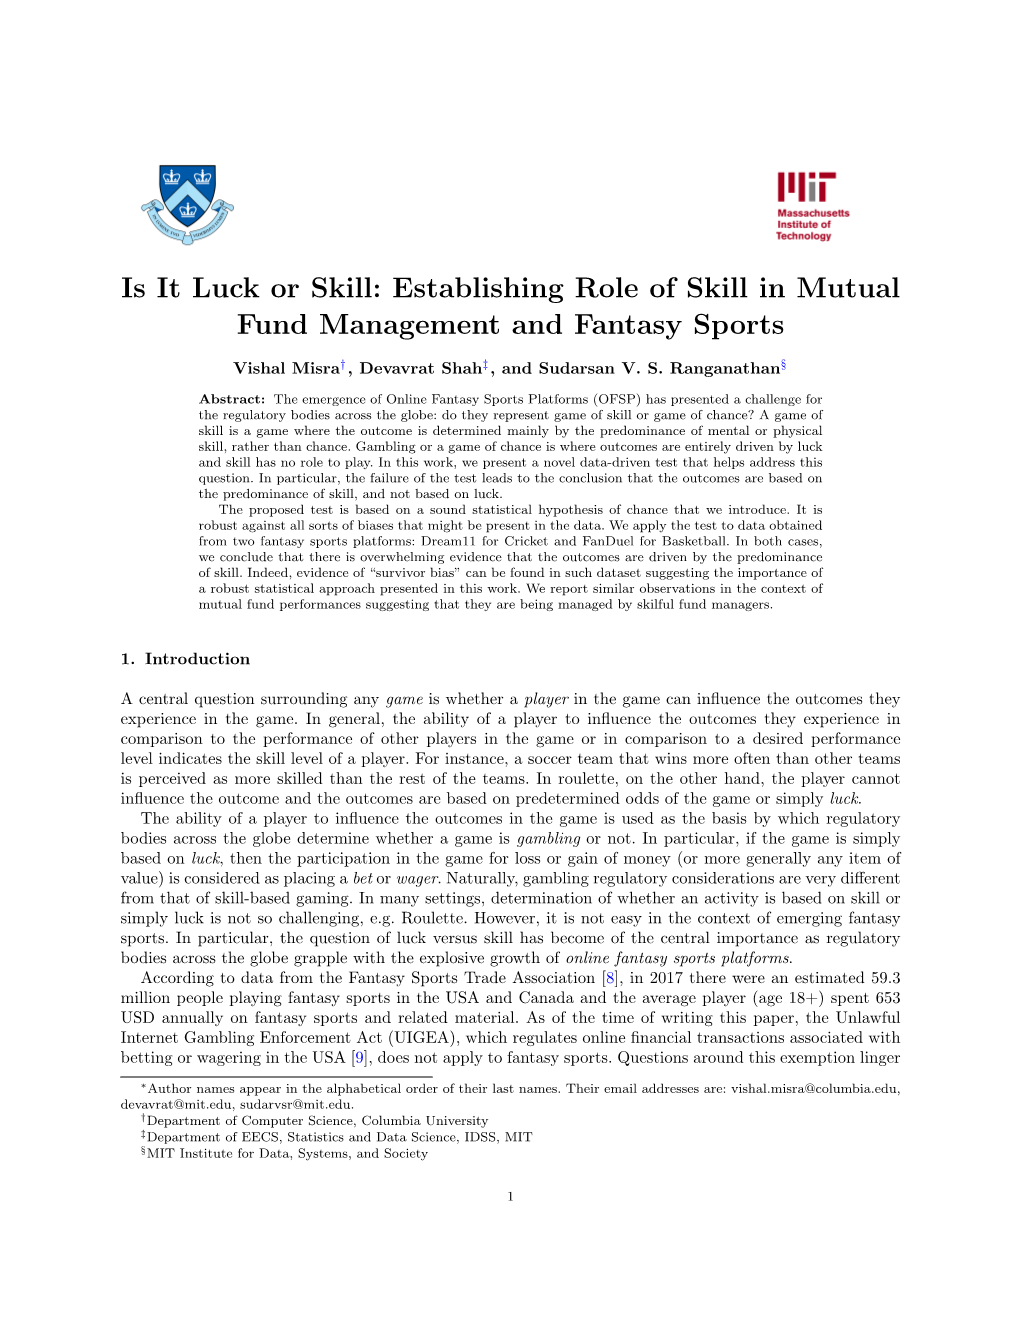 Is It Luck Or Skill: Establishing Role of Skill in Mutual Fund Management and Fantasy Sports